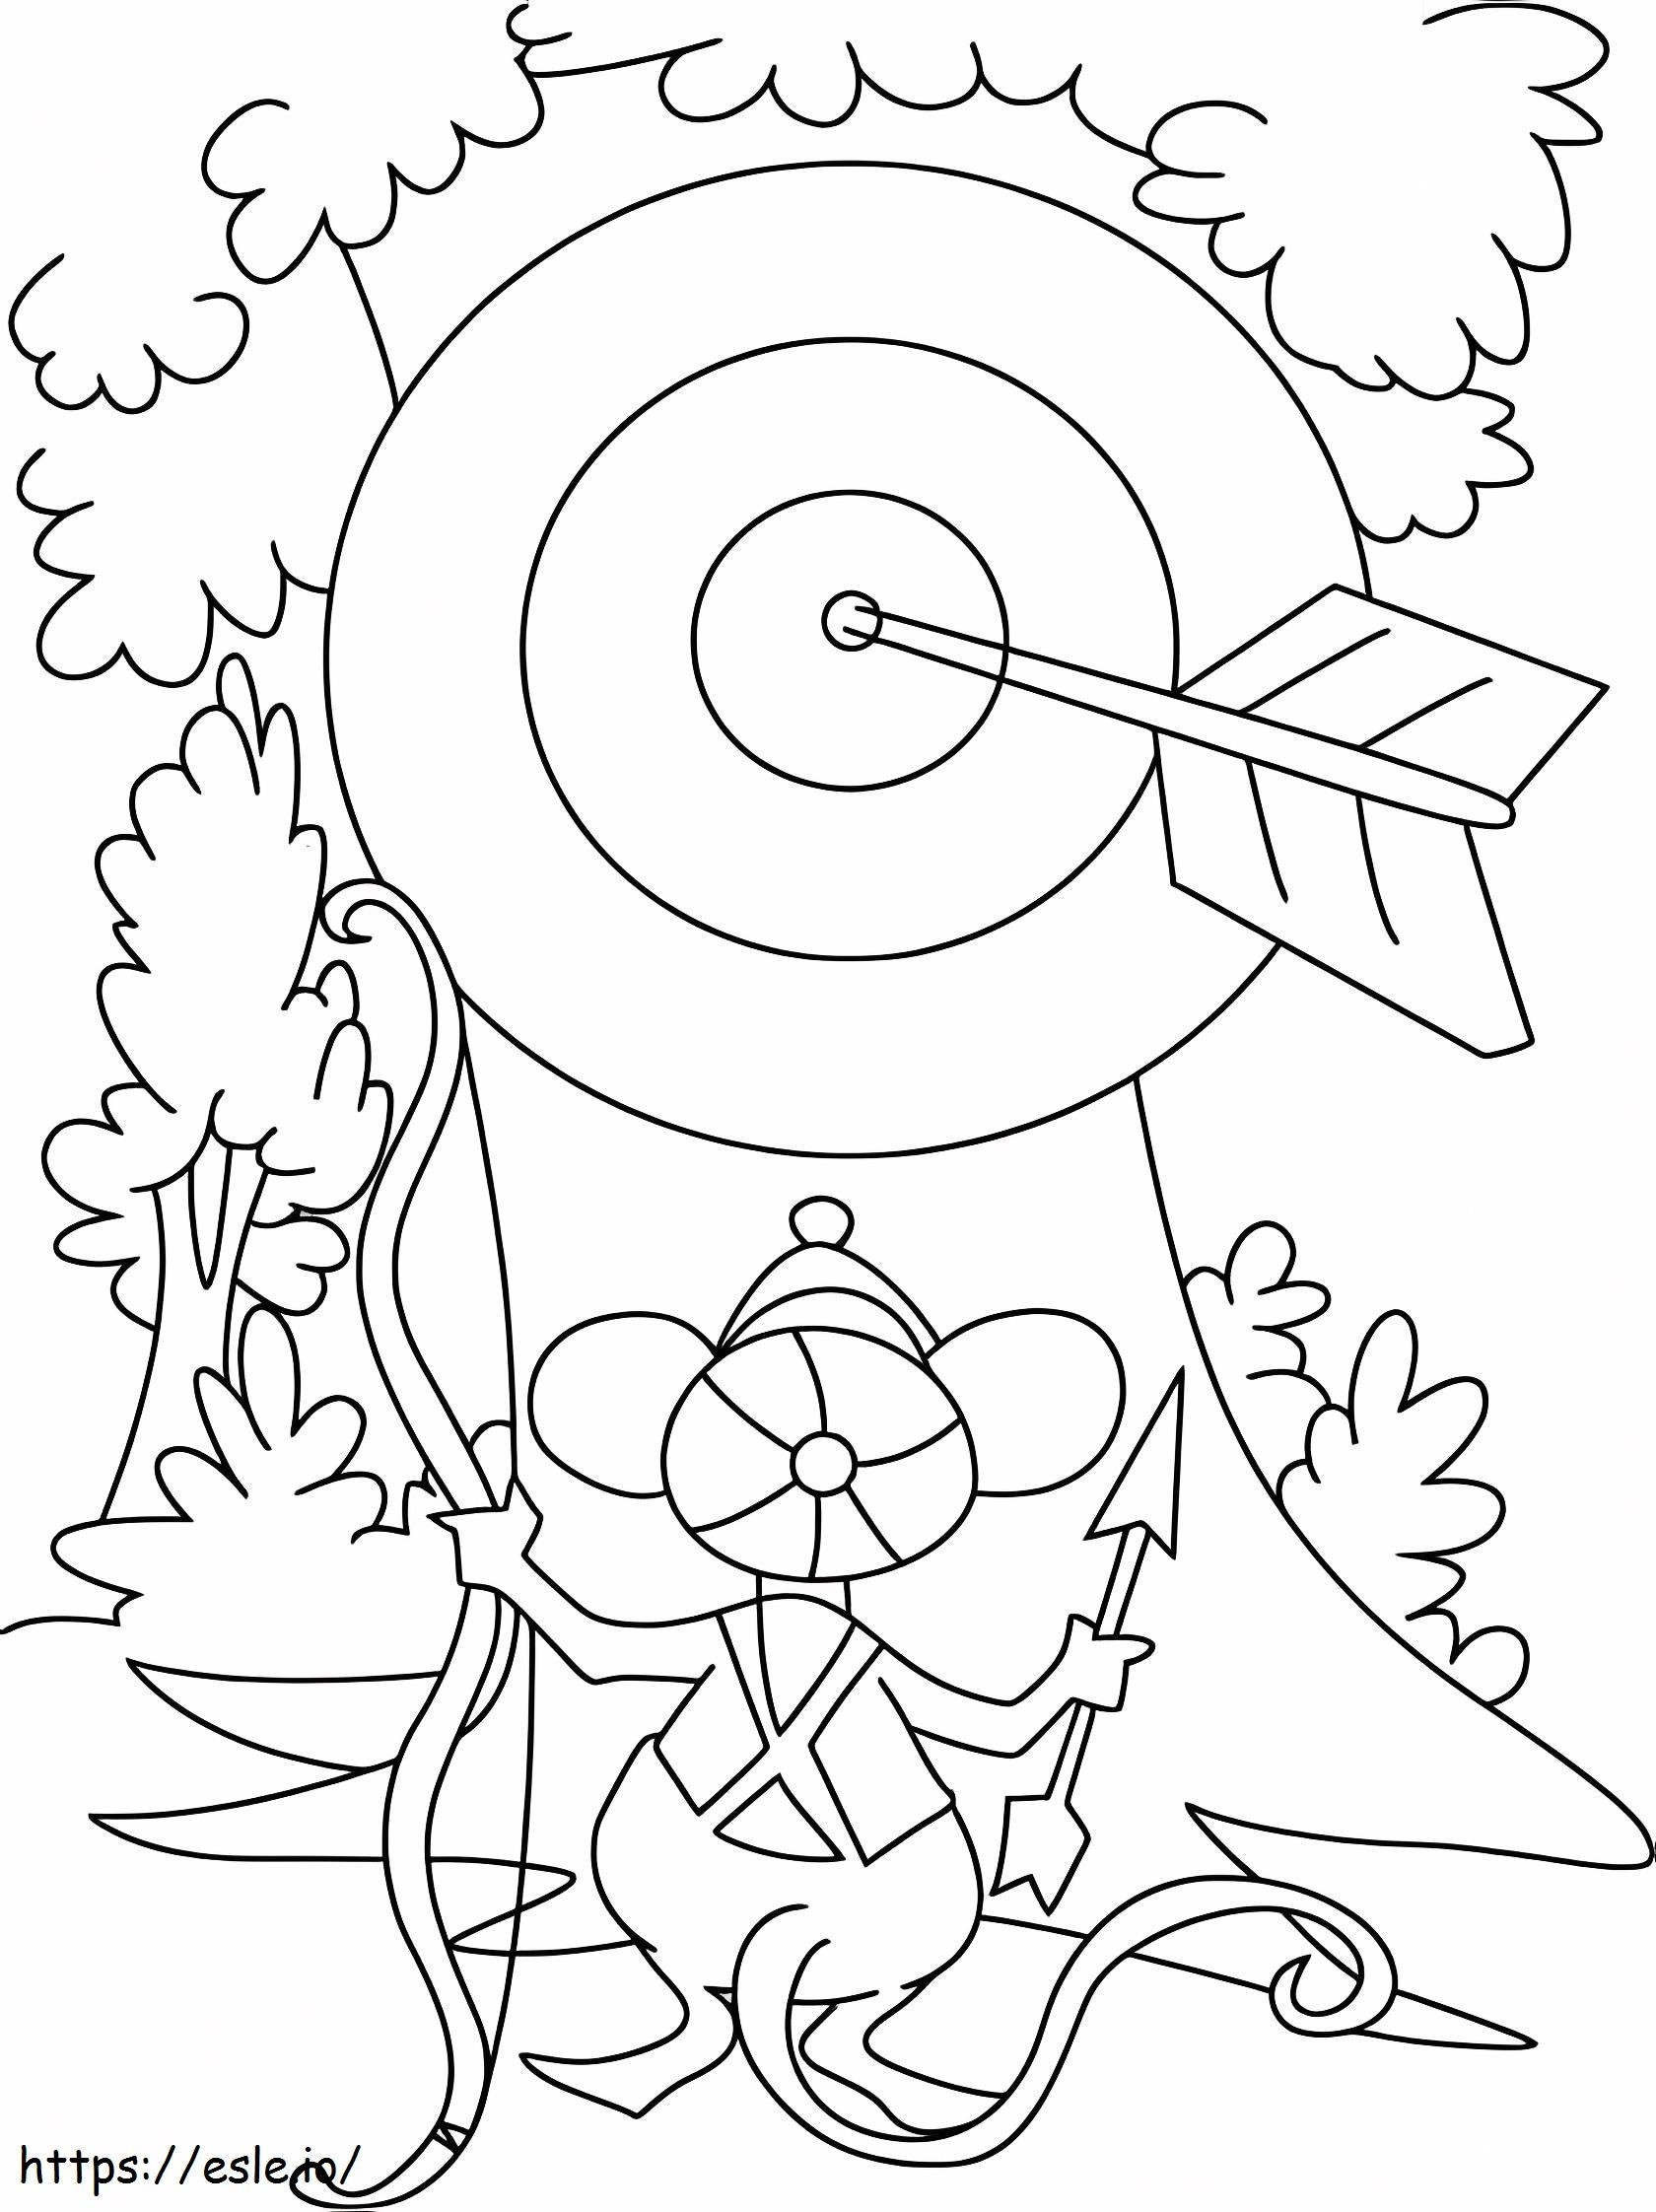 Mouse Archery coloring page